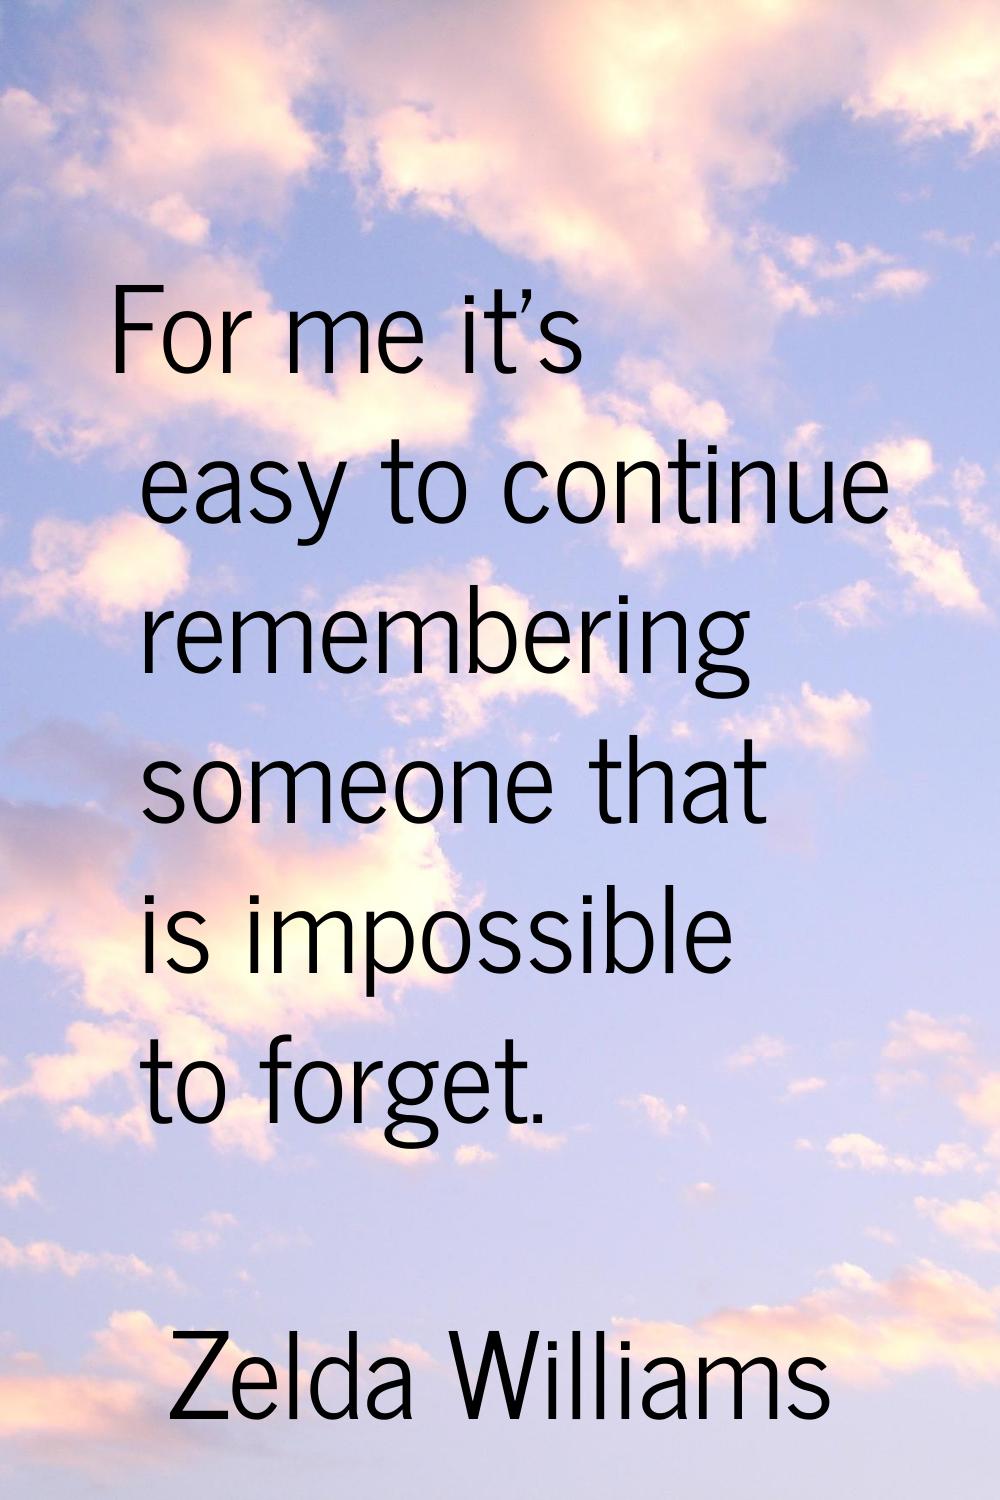 For me it's easy to continue remembering someone that is impossible to forget.